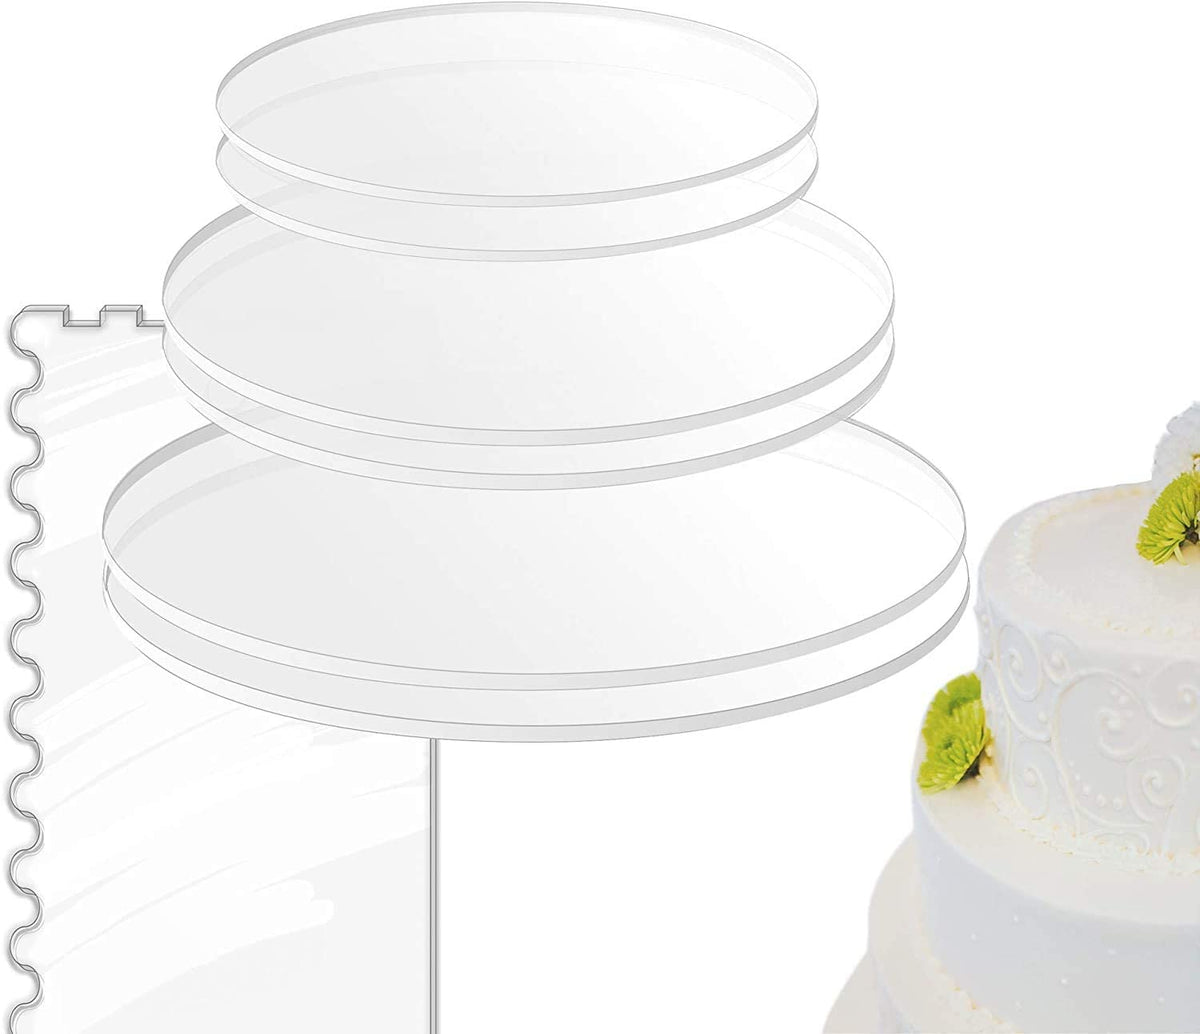 Acrylic Cake Disc Combo Kit - 2 Circles Each Size (0.12 inch thick) with Scraper